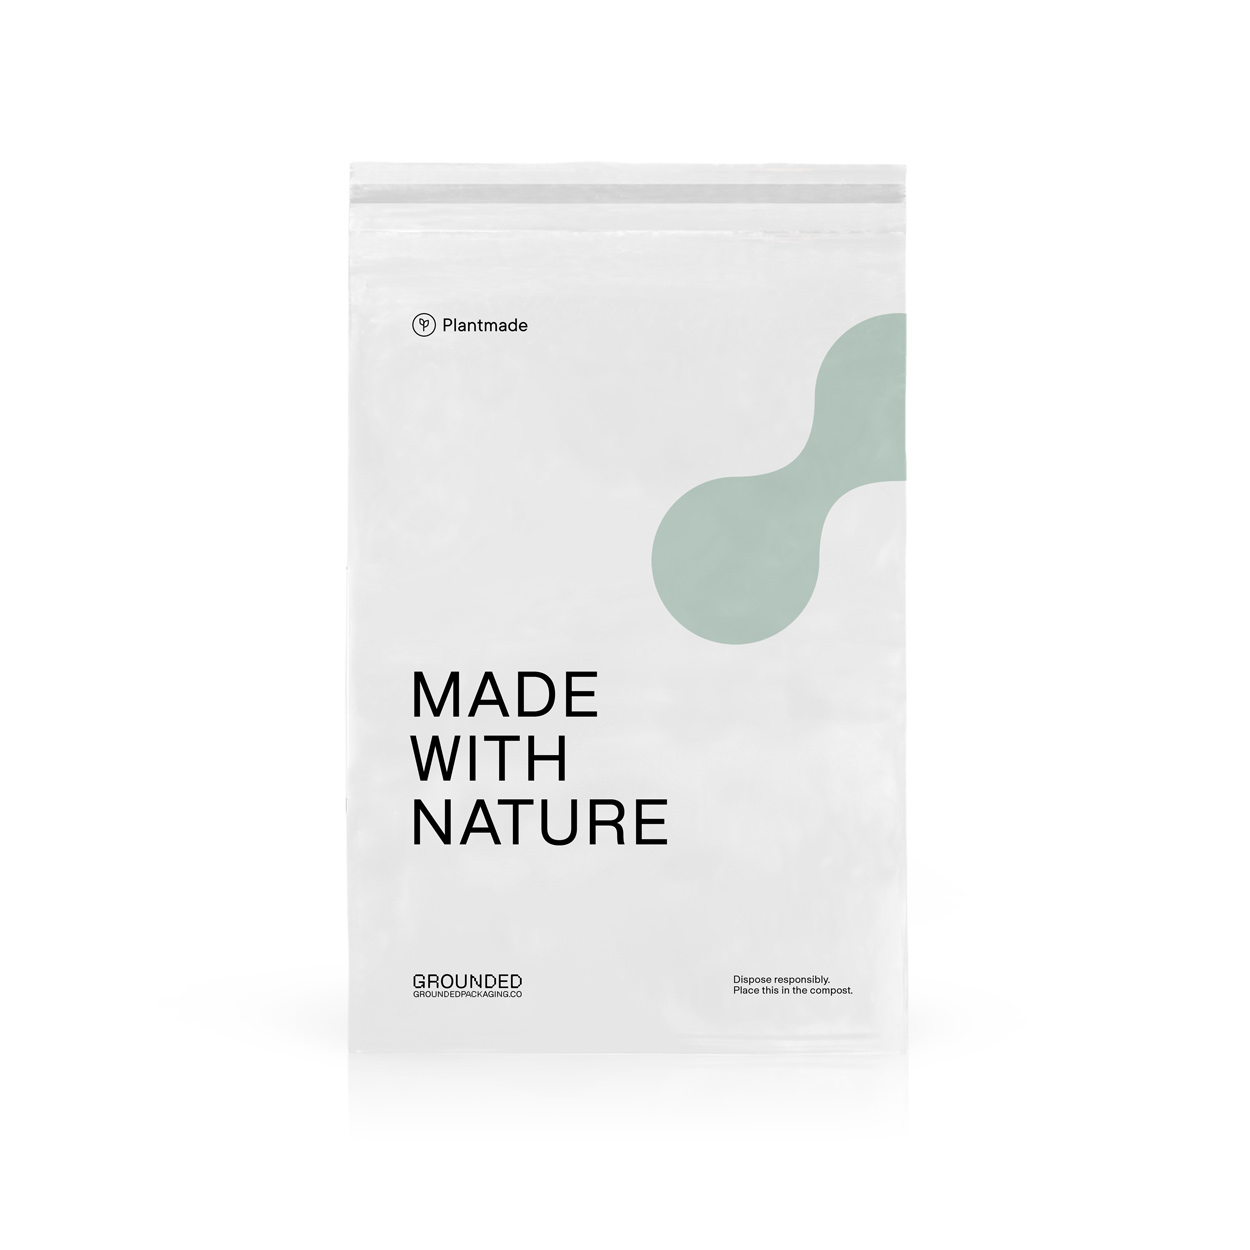 Details more than 77 compostable poly bags - in.cdgdbentre